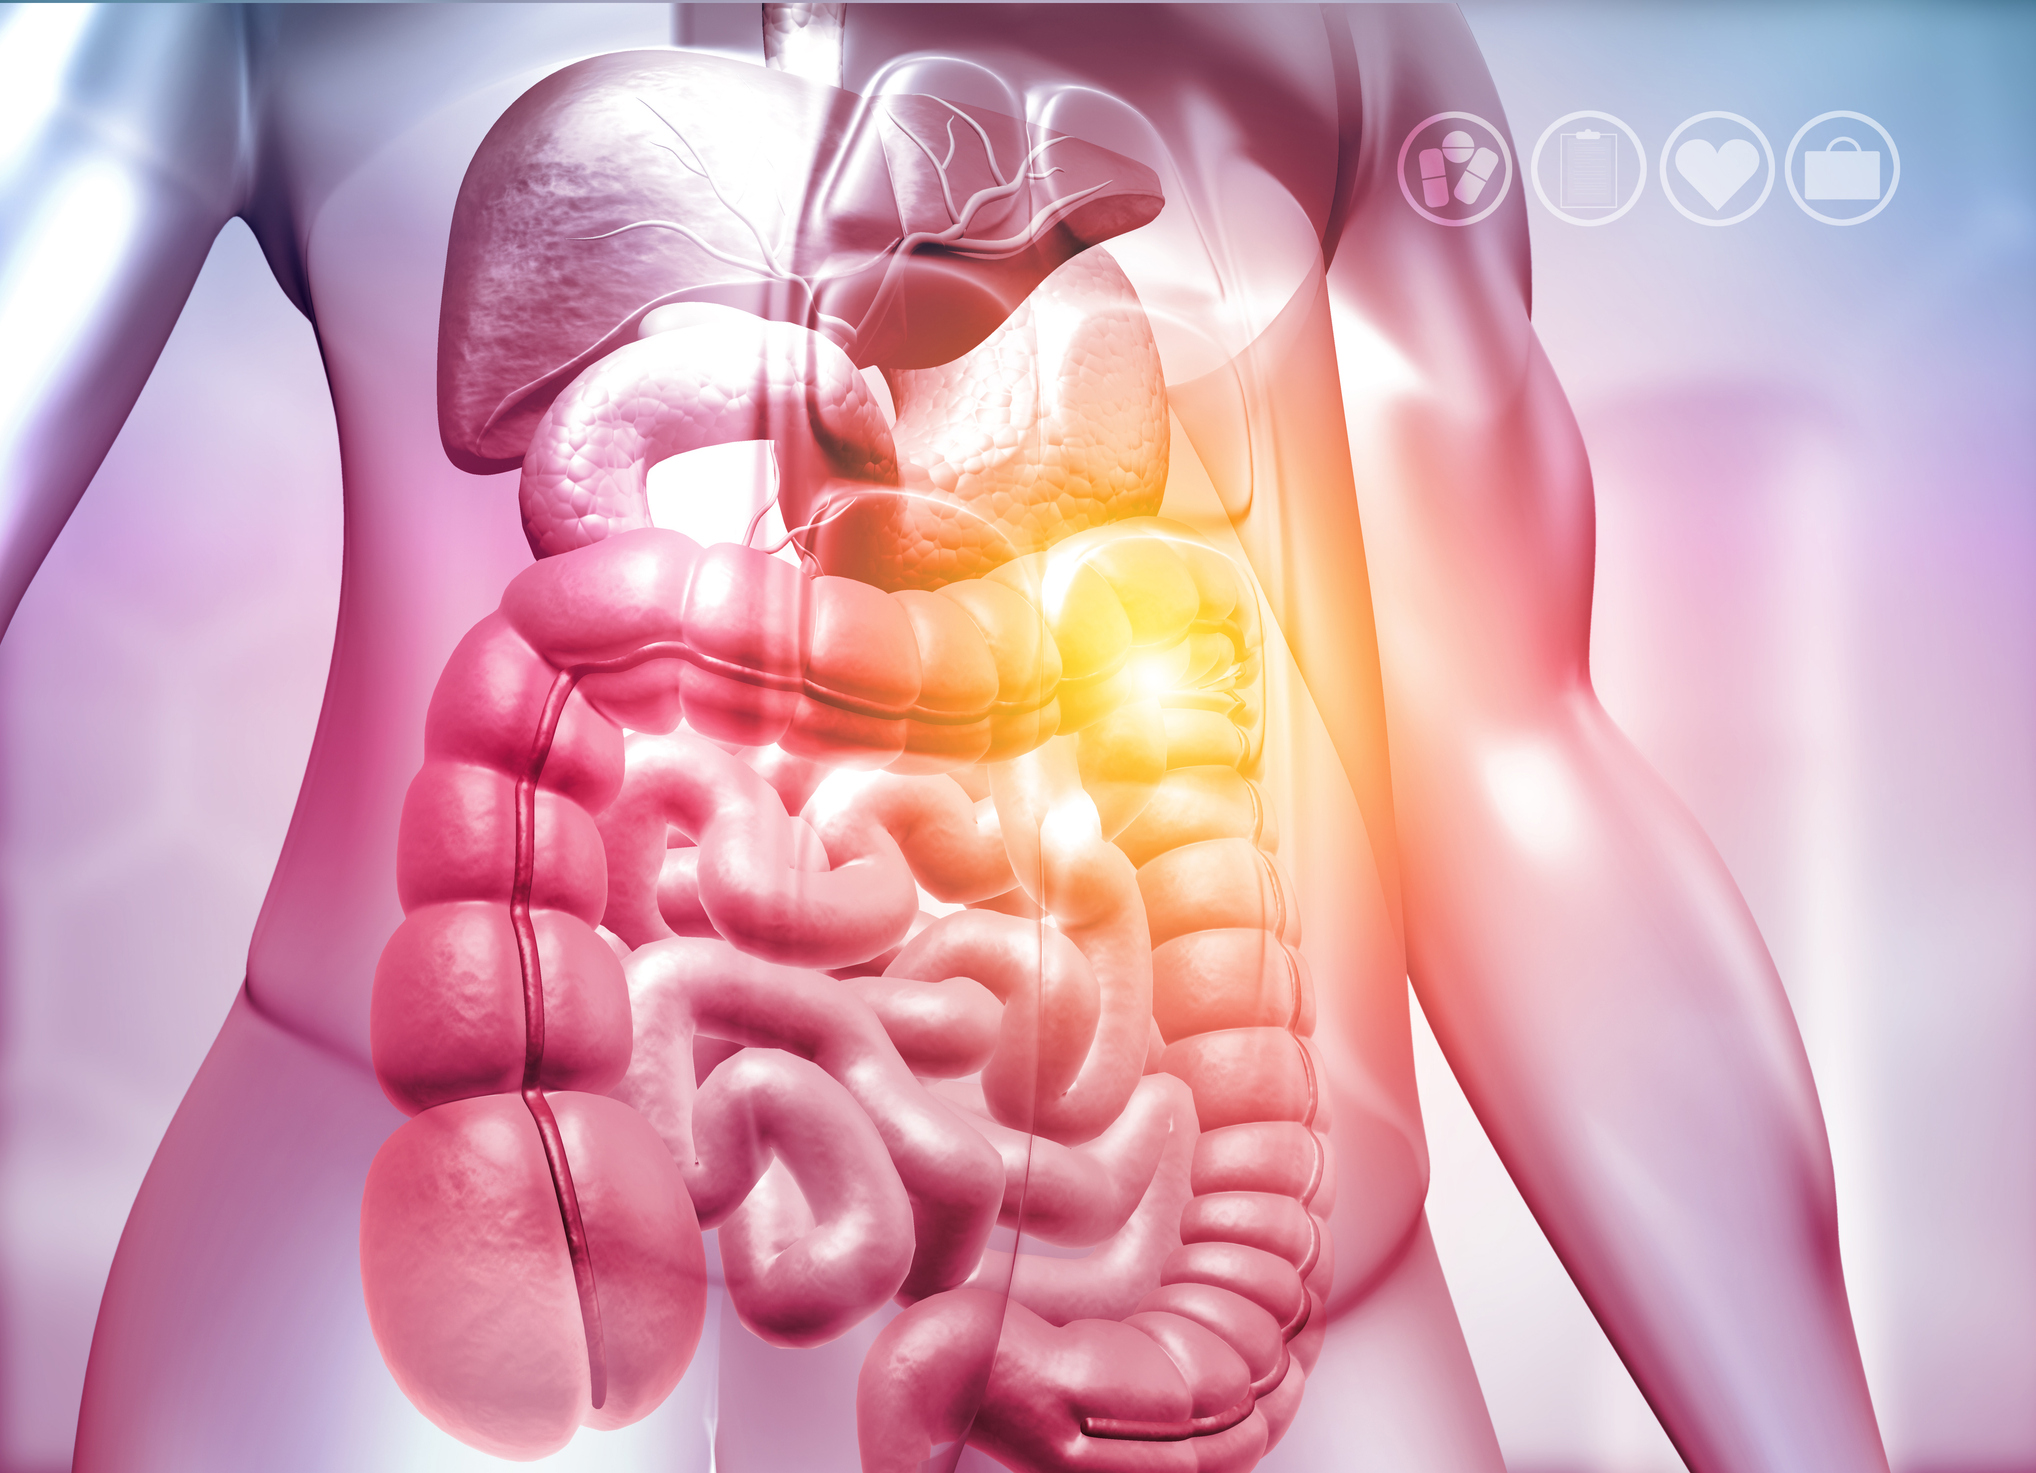 Human body with digestive system on medical background. 3d illustration